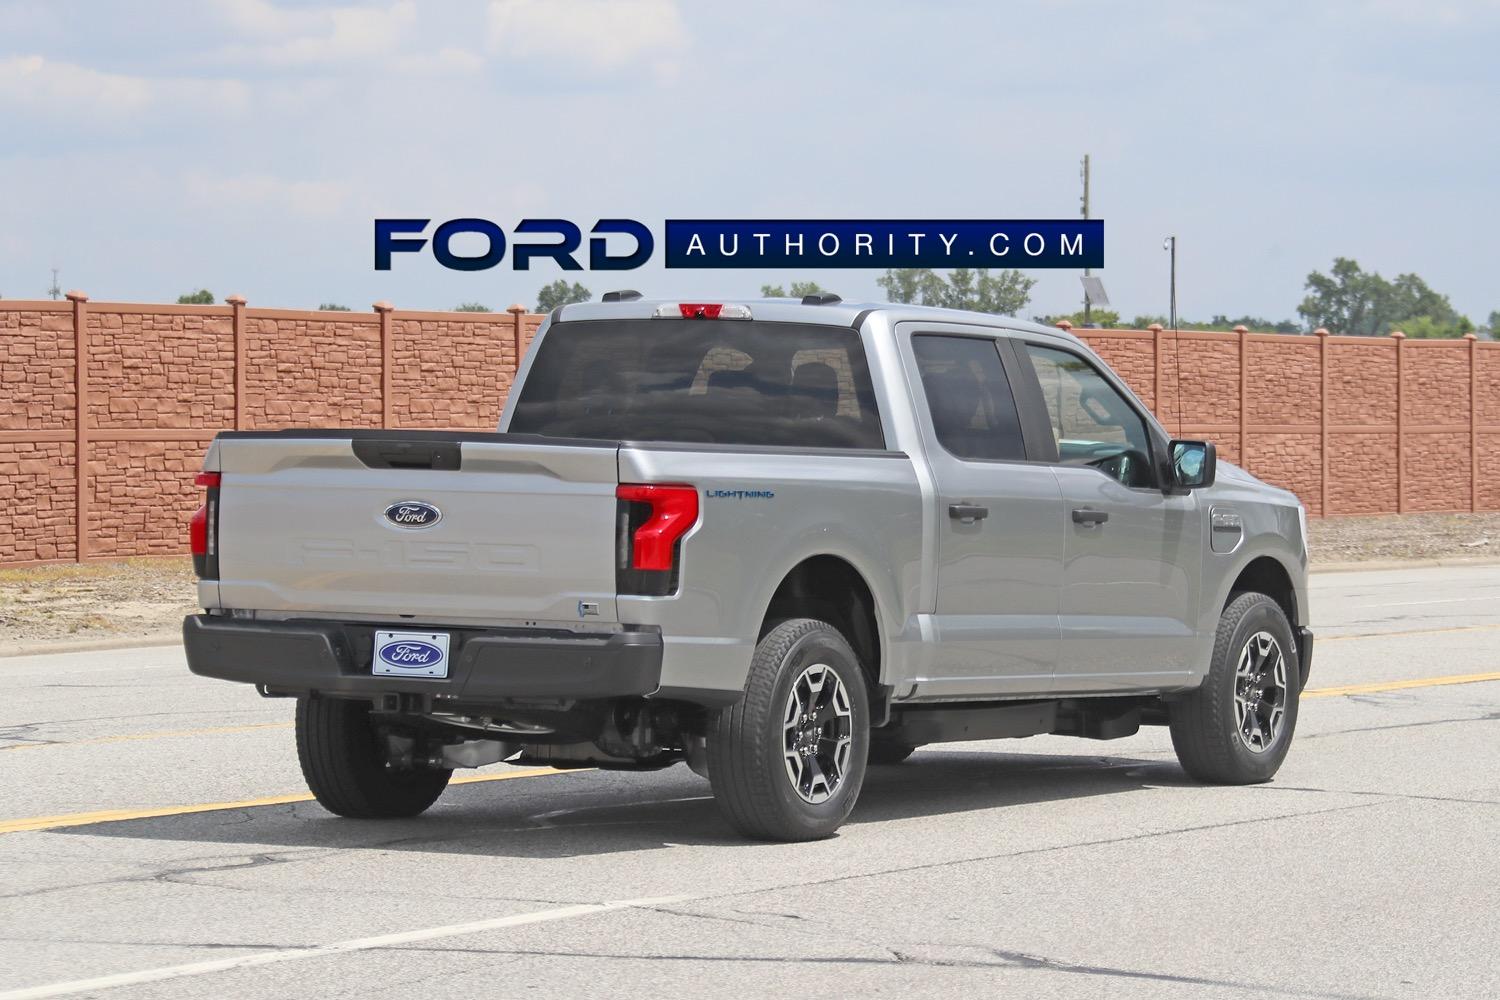 Ford F-150 Lightning ICONIC SILVER F-150 Lightning Photos & Club 2022-Ford-F-150-Lightning-Pro-Iconic-Silver-Real-World-Pictures-Exterior-007